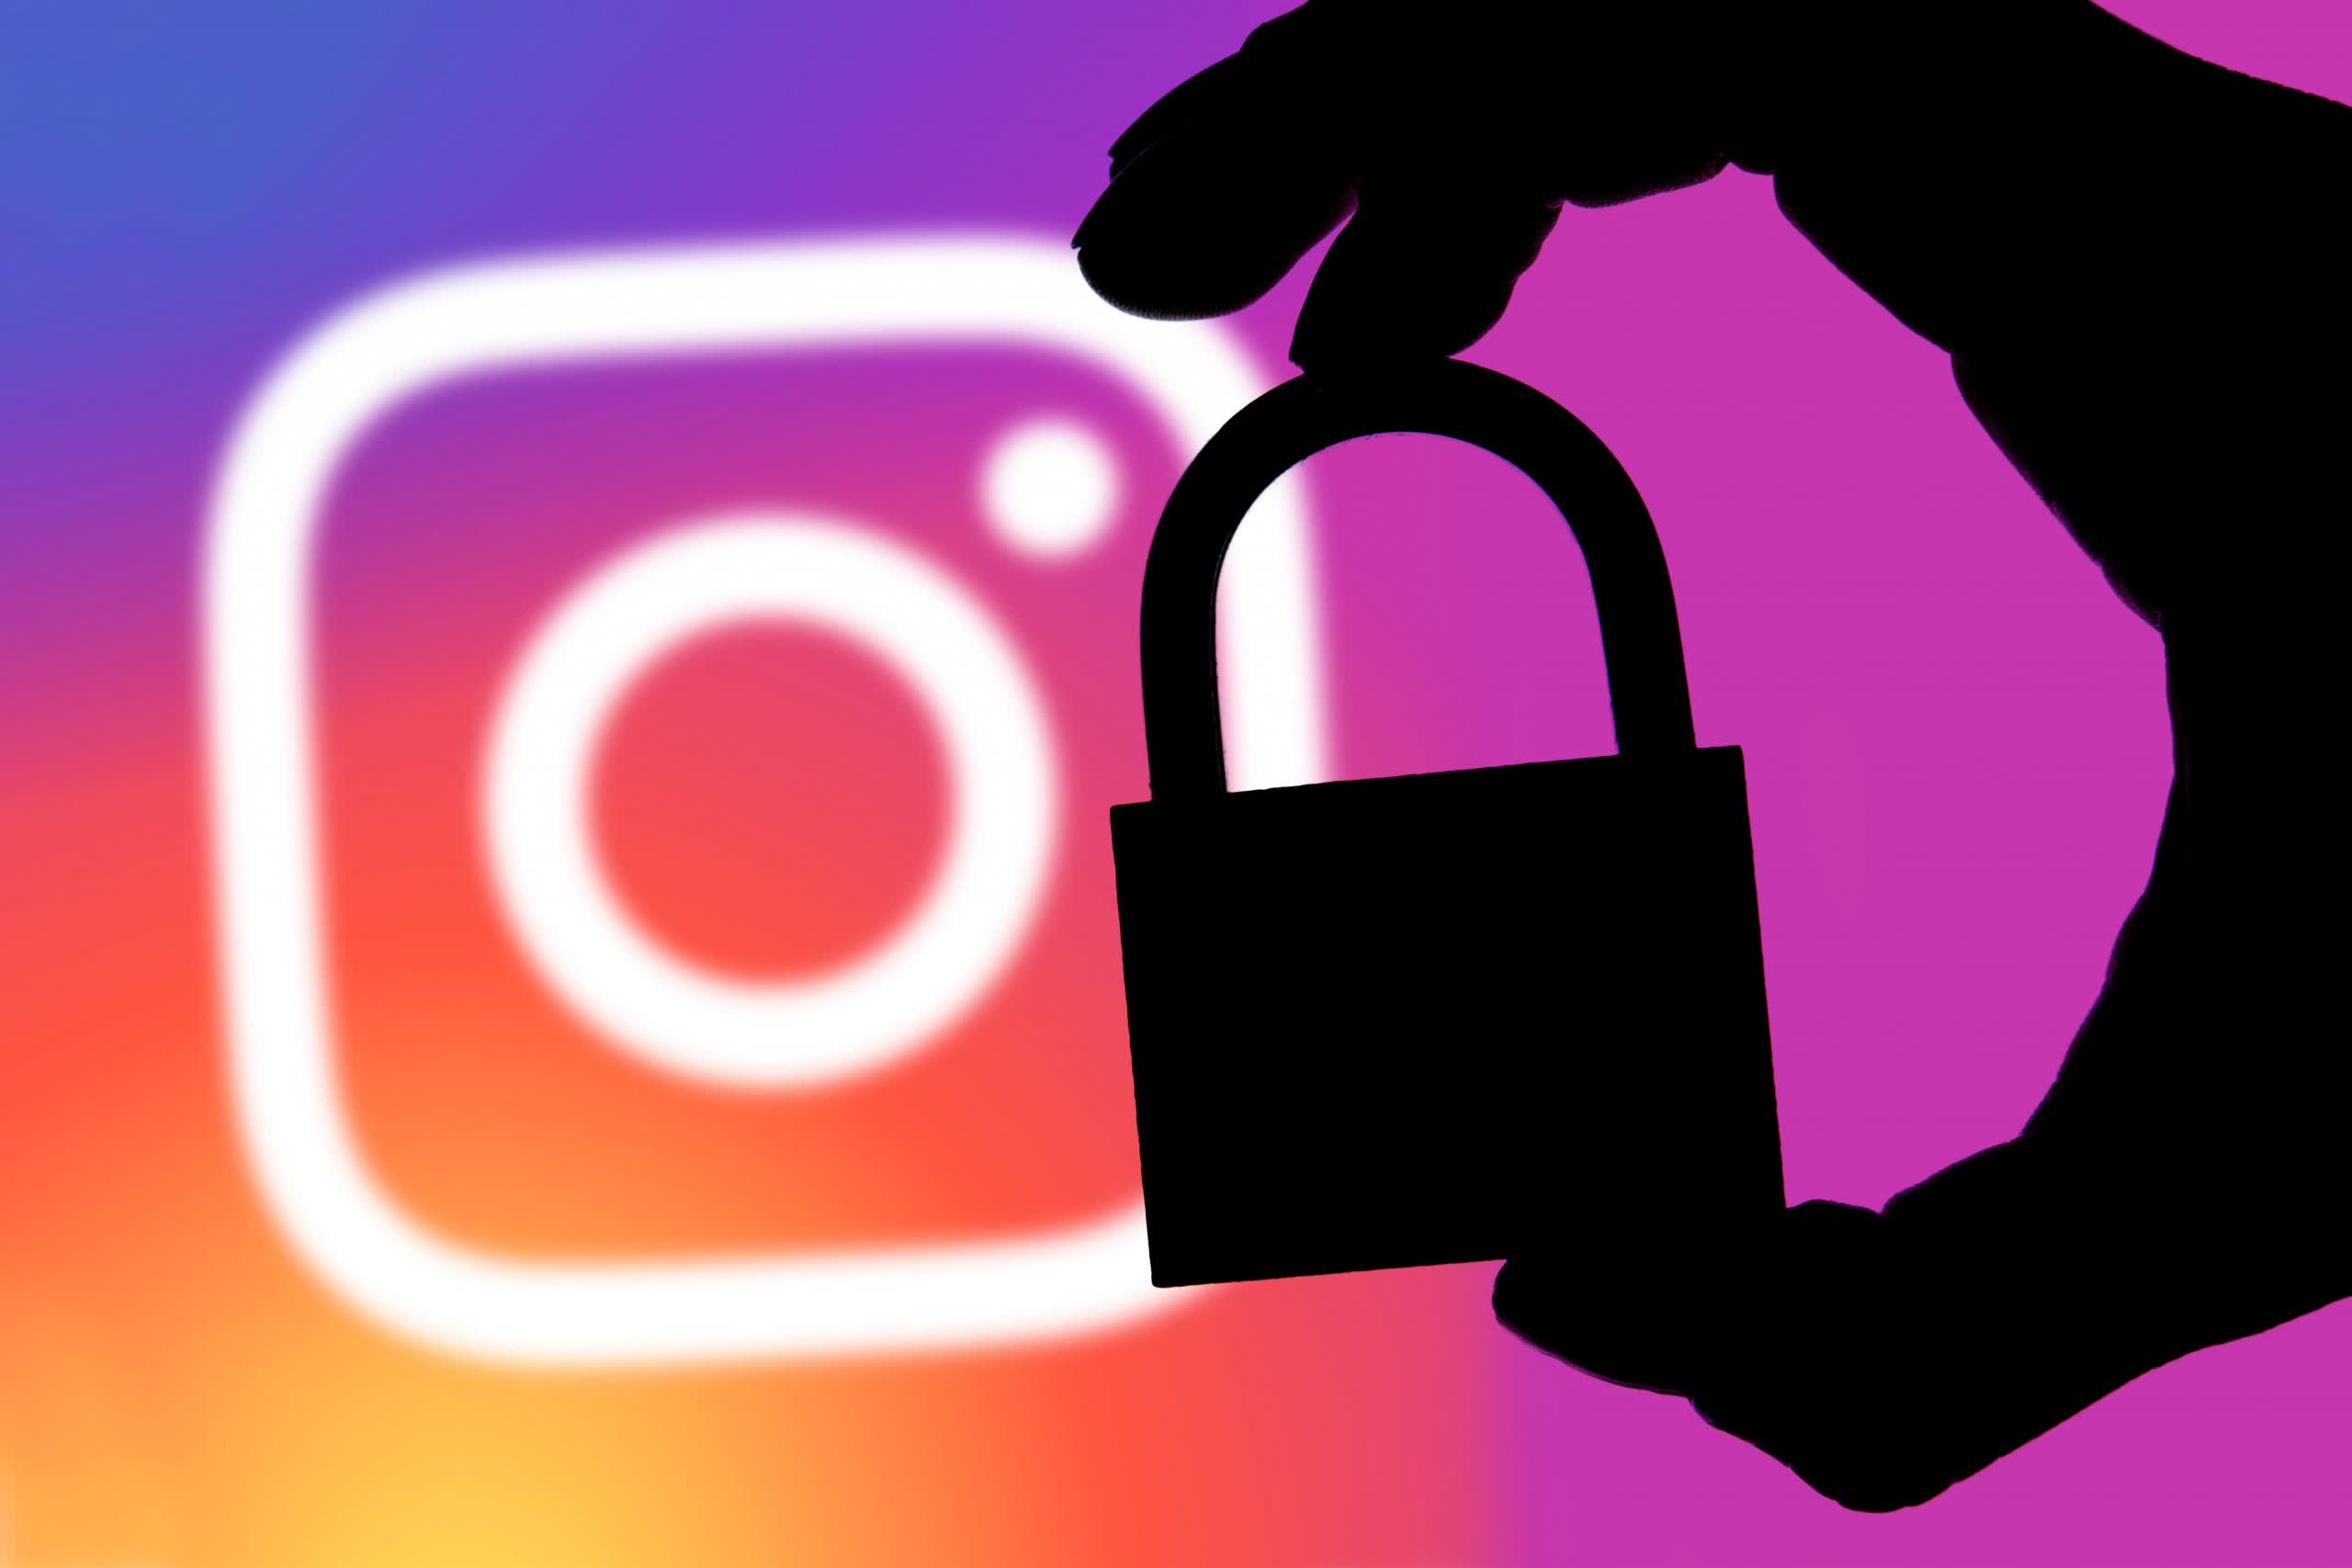 Researchers discover RCE exploit to hijack the Instagram mobile app